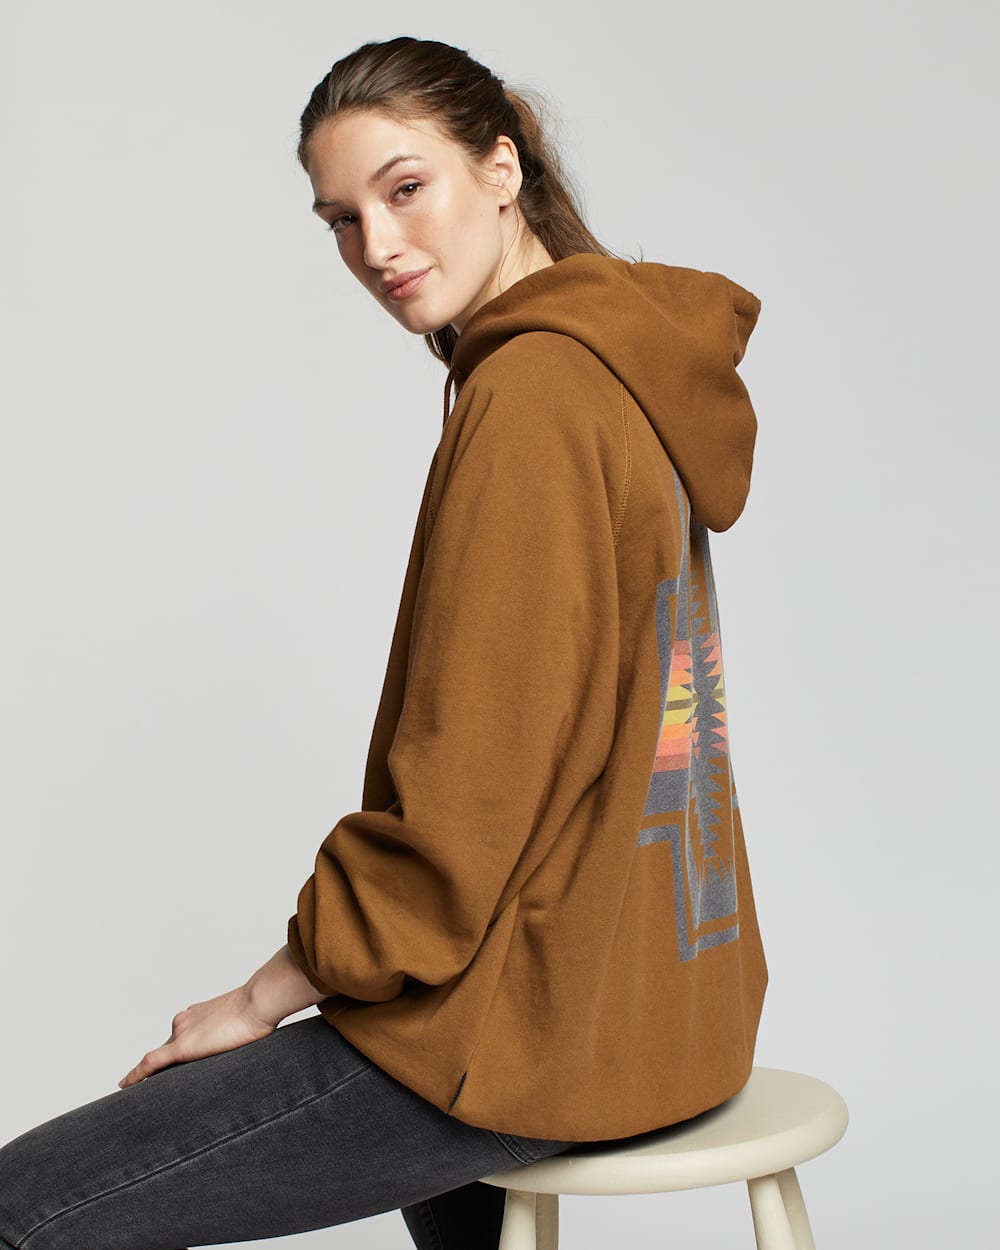 ALTERNATE VIEW OF LIMITED EDITION HOODIE IN TAN HARDING image number 5